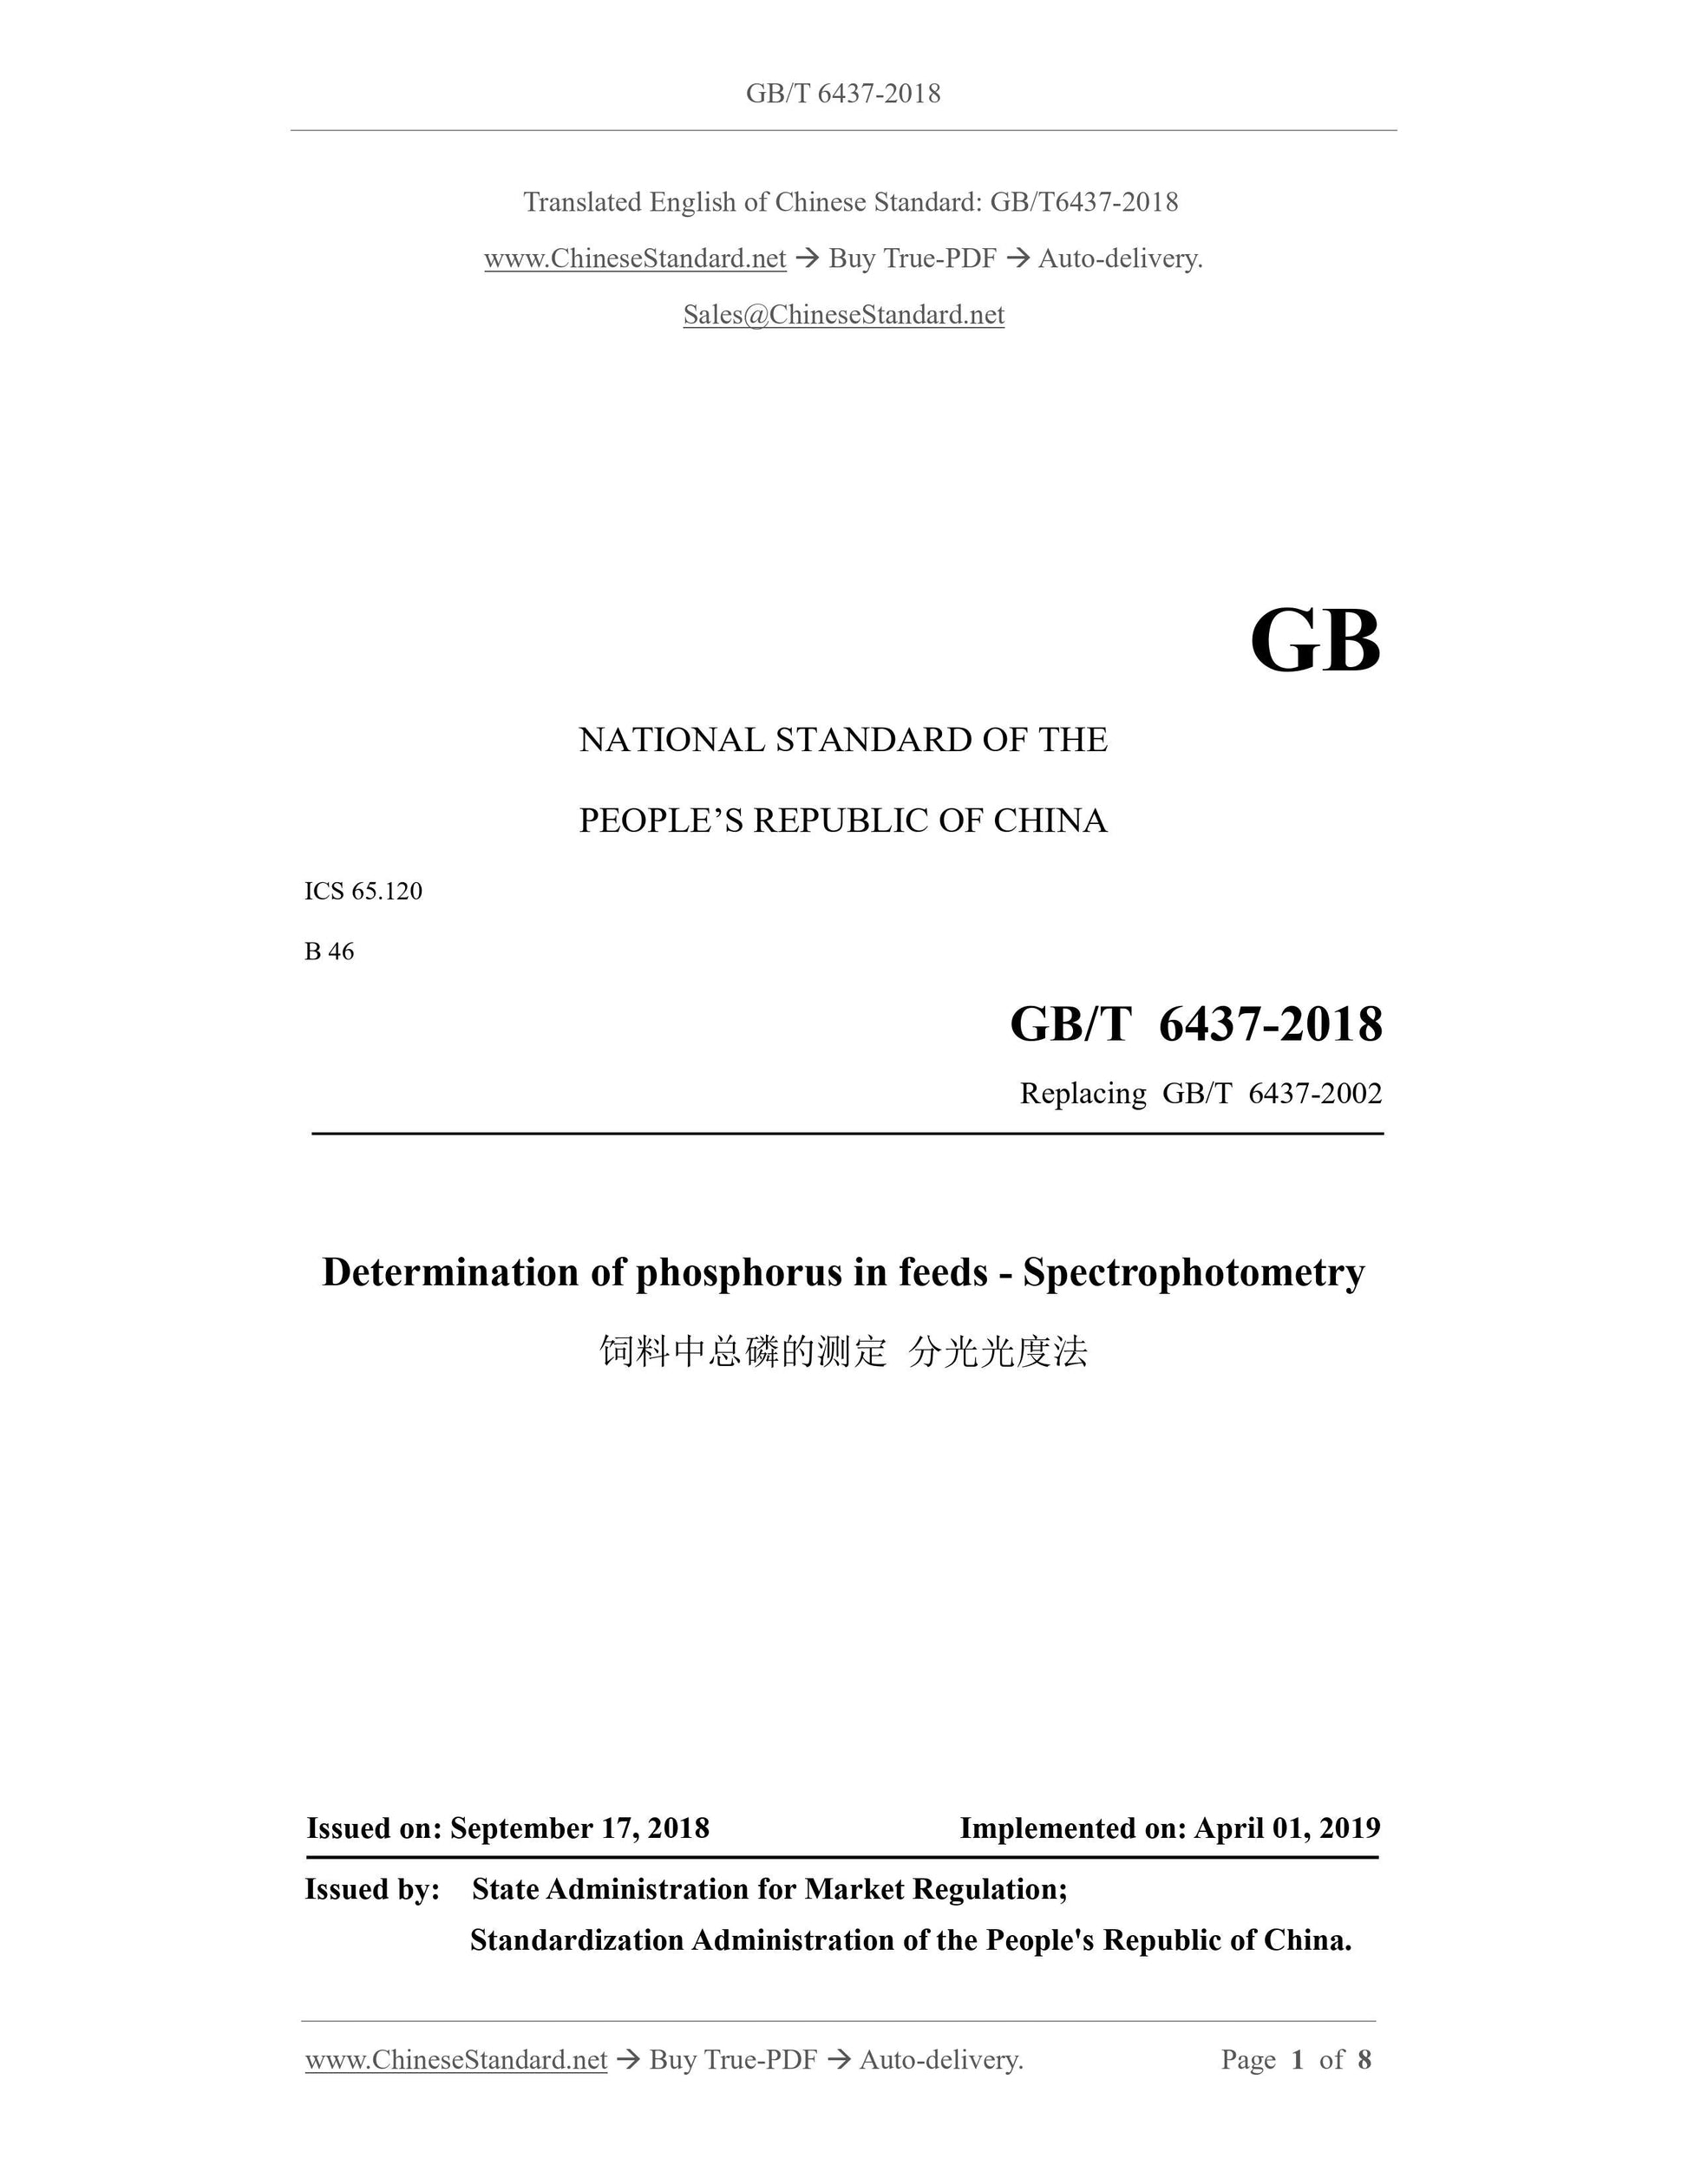 GB/T 6437-2018 Page 1